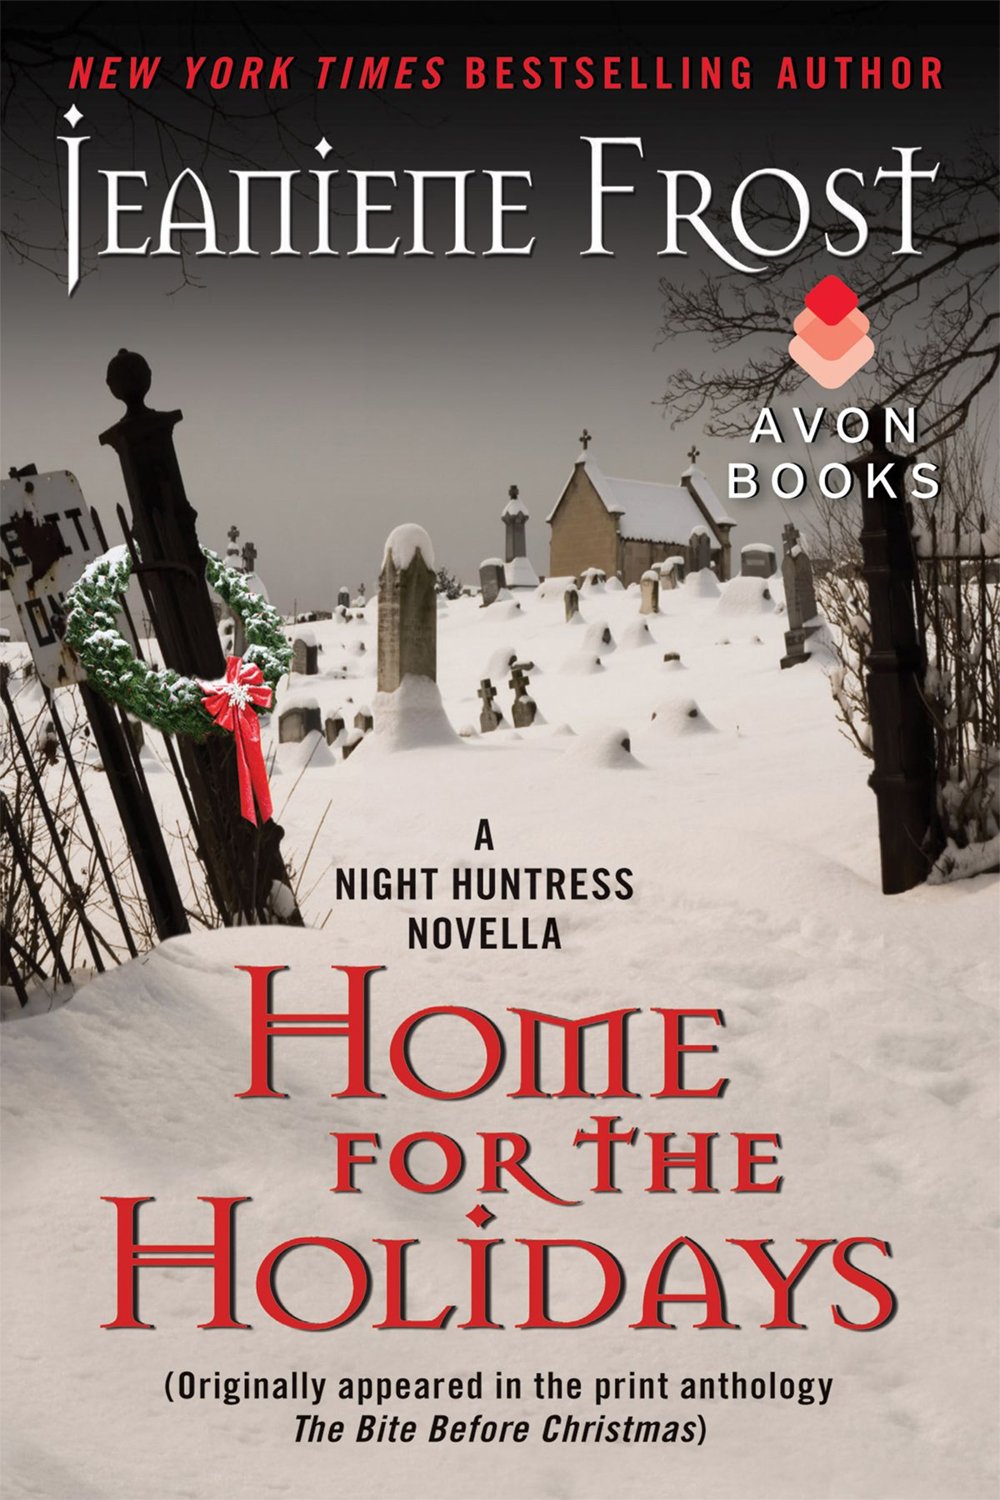 S1 E31 Home for the Holidays by Jeaniene Frost